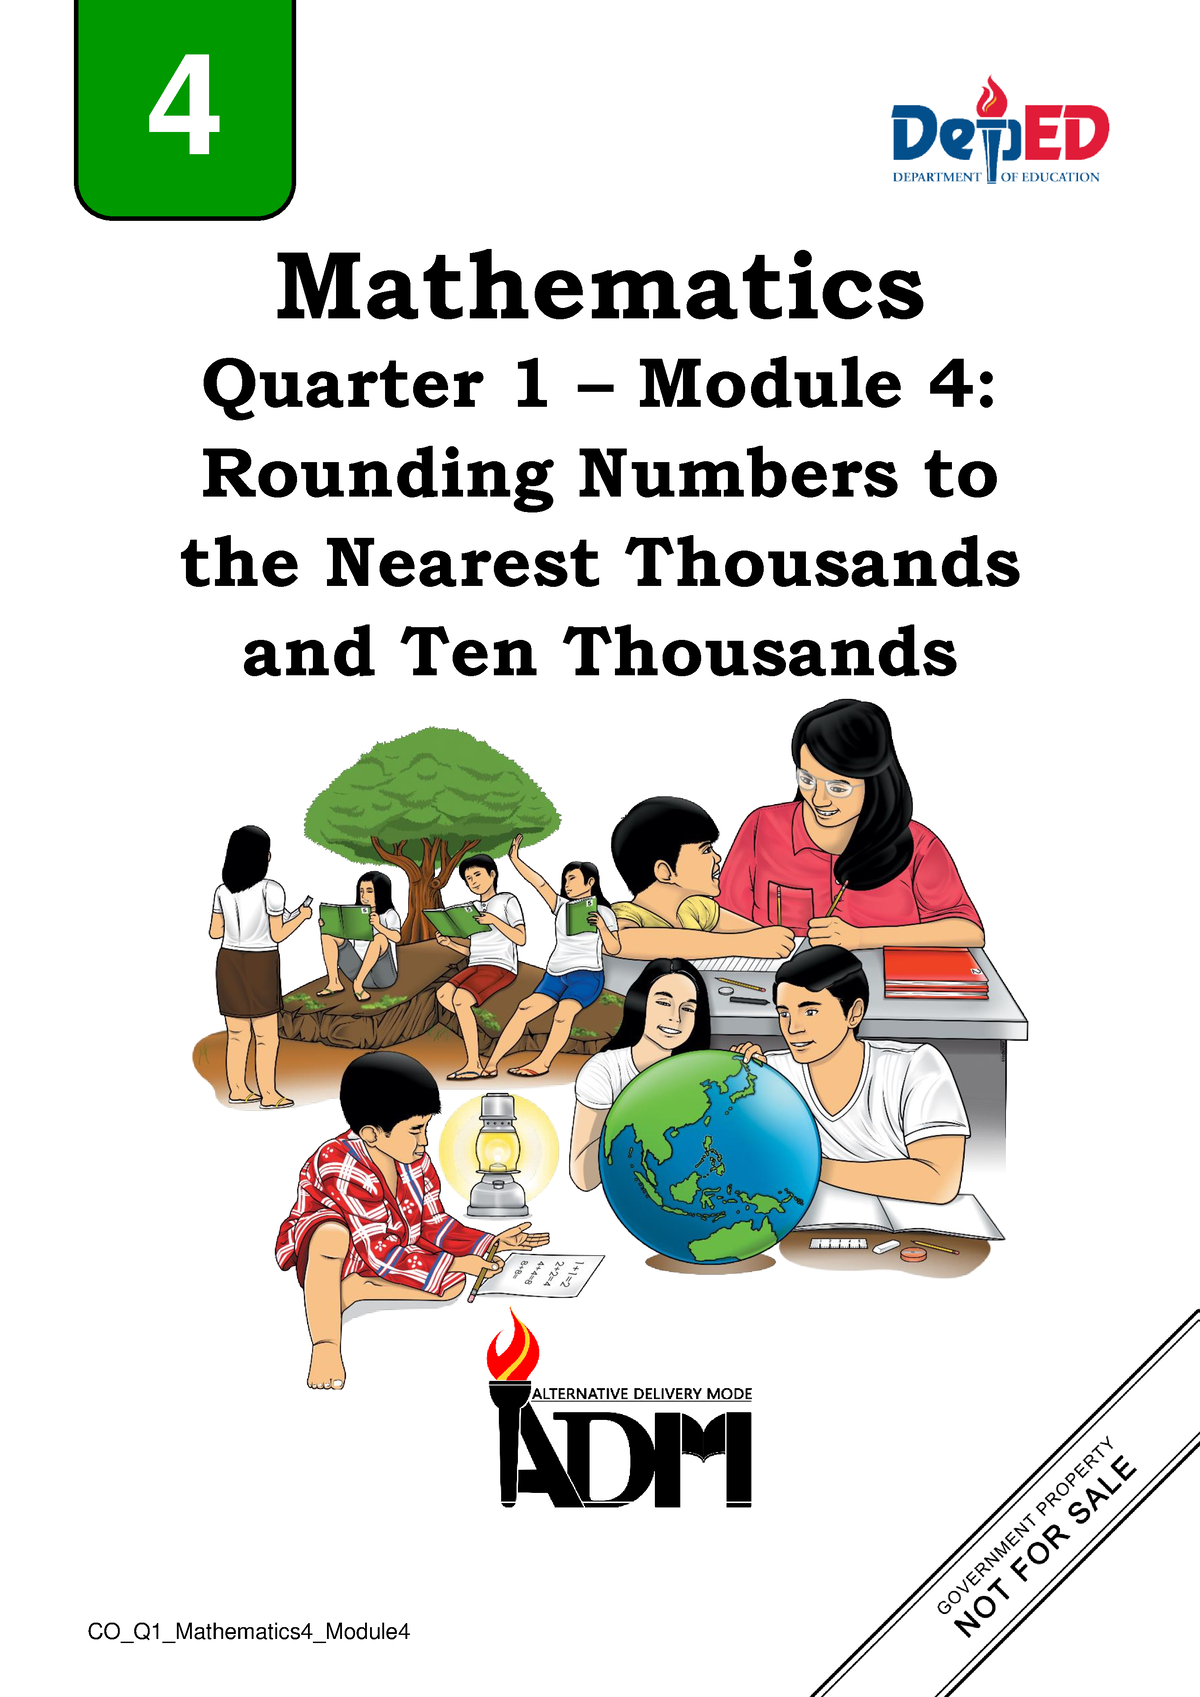 math4-q1-mod4-rounding-numbers-to-the-nearest-thousands-and-ten